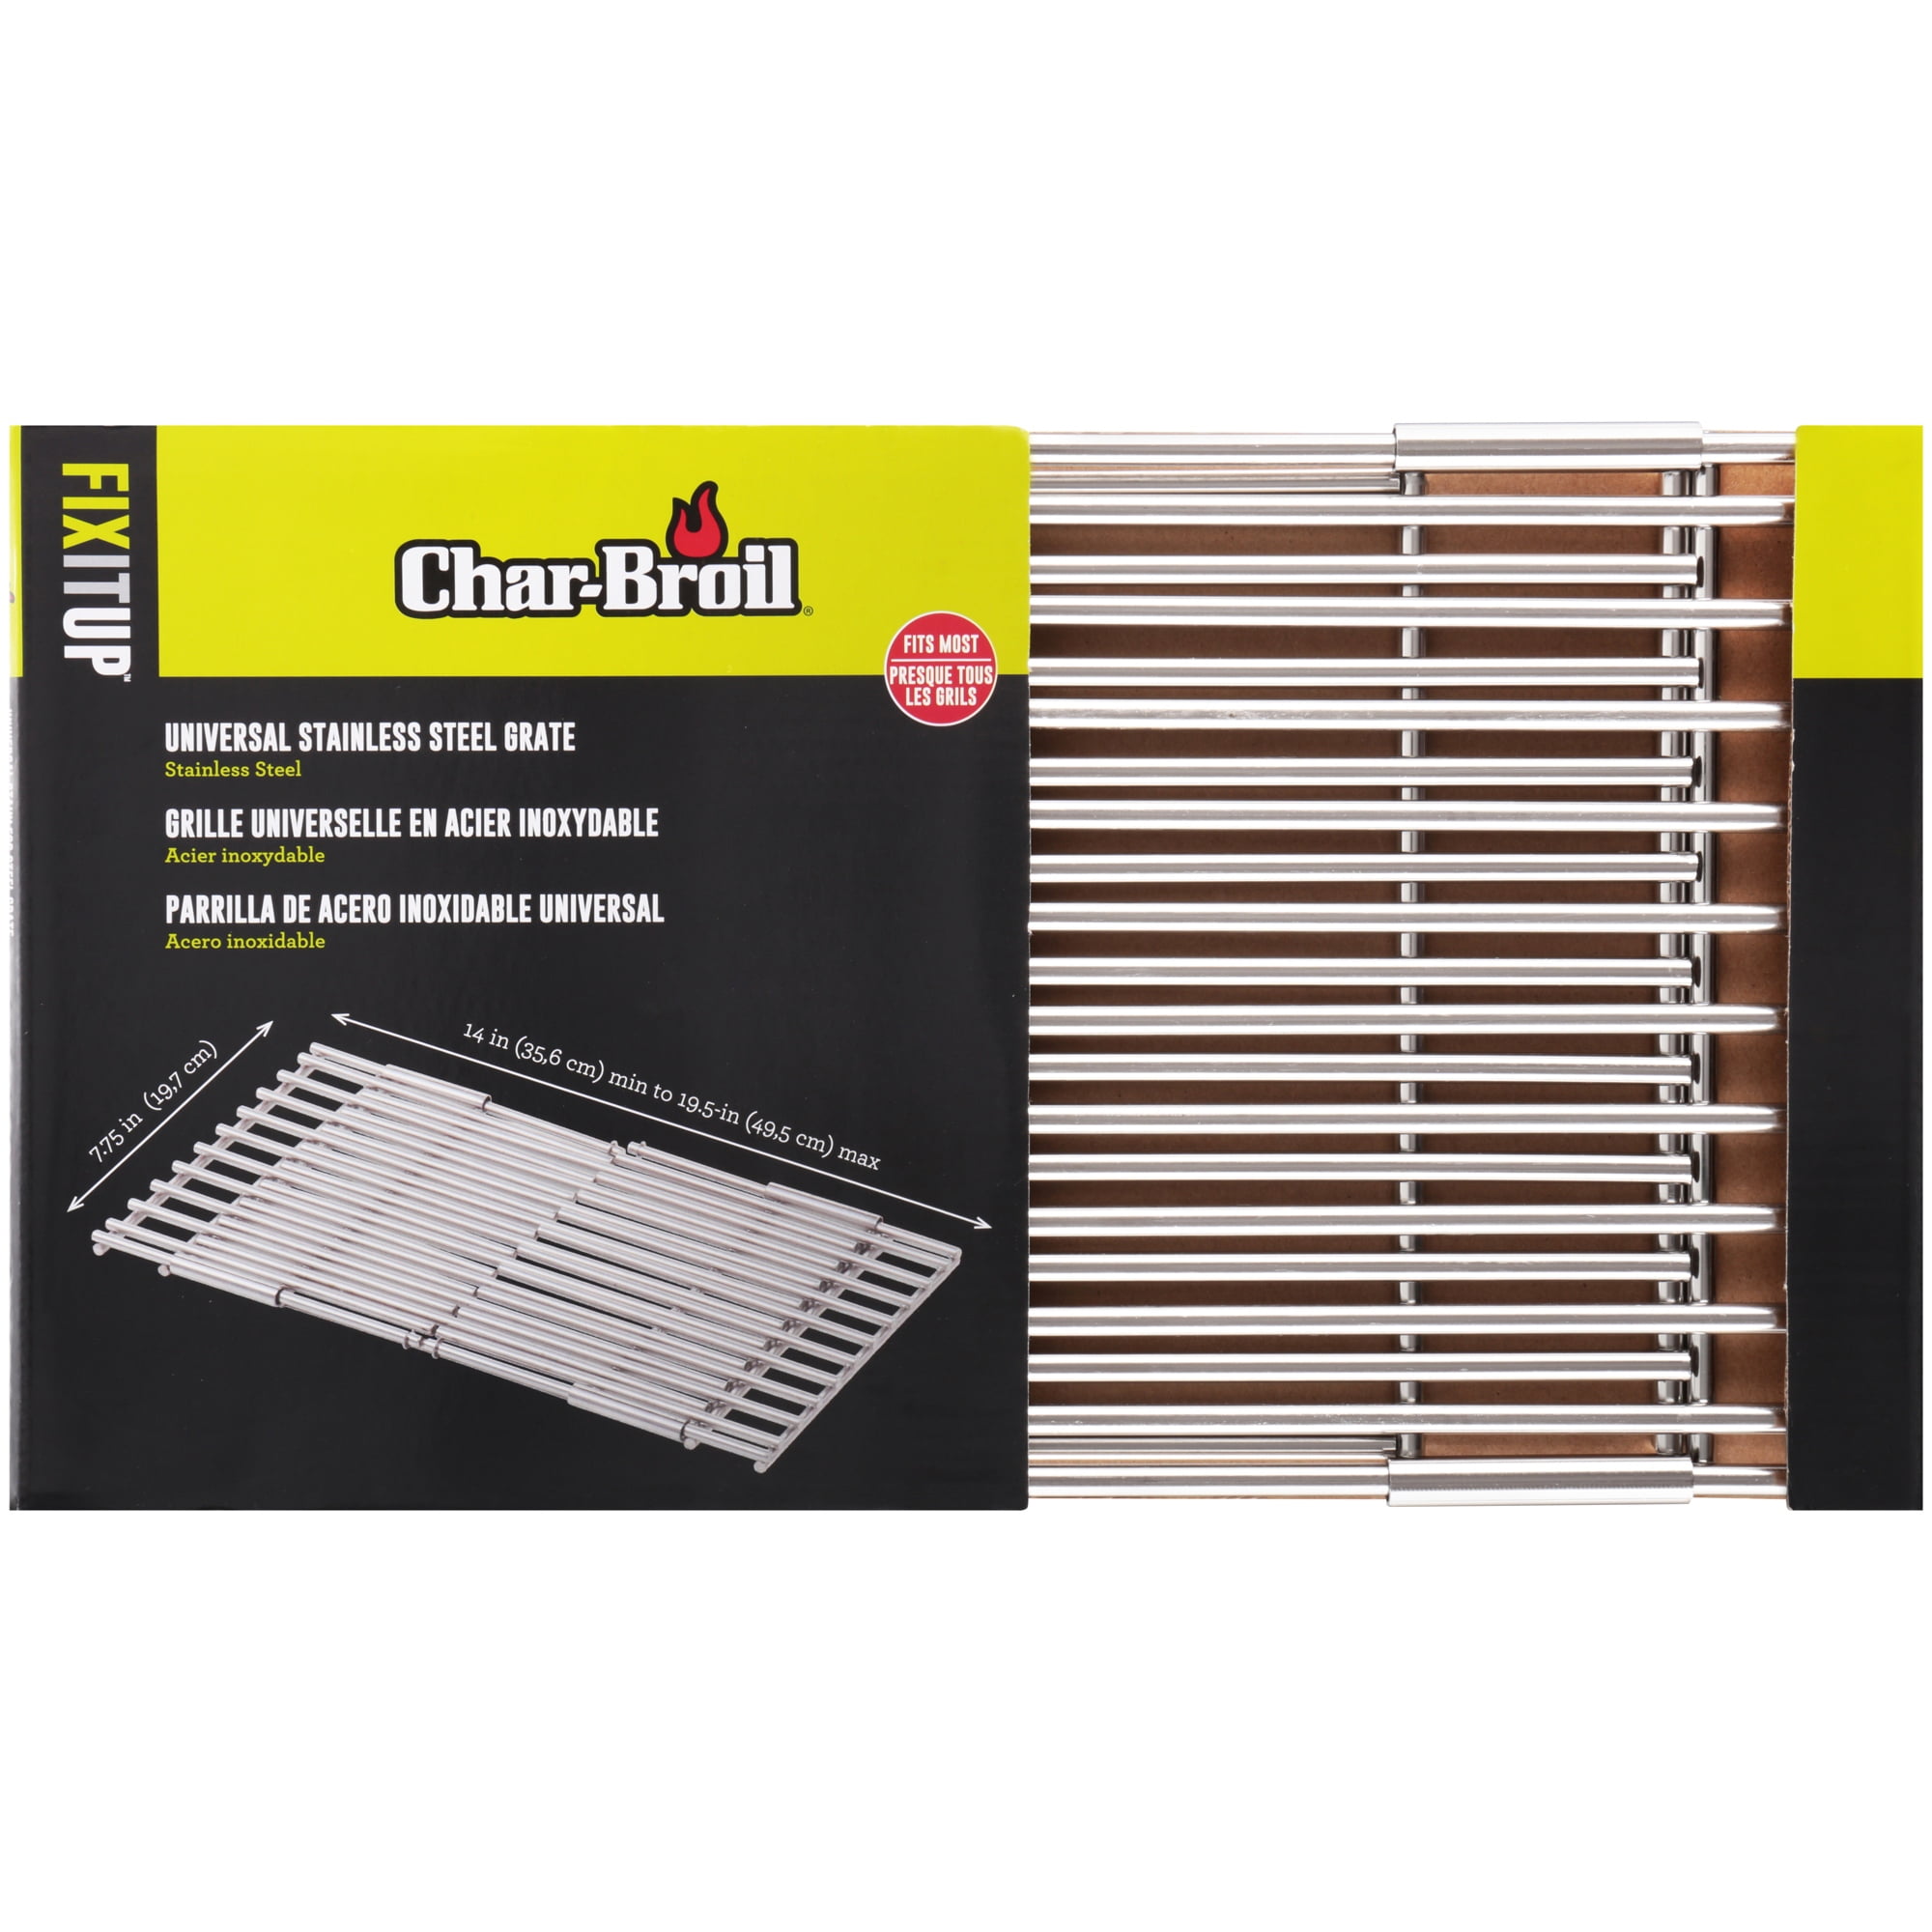 OEM Char-Broil Universal Stainless Steel Grate # 2455674 for sale online 